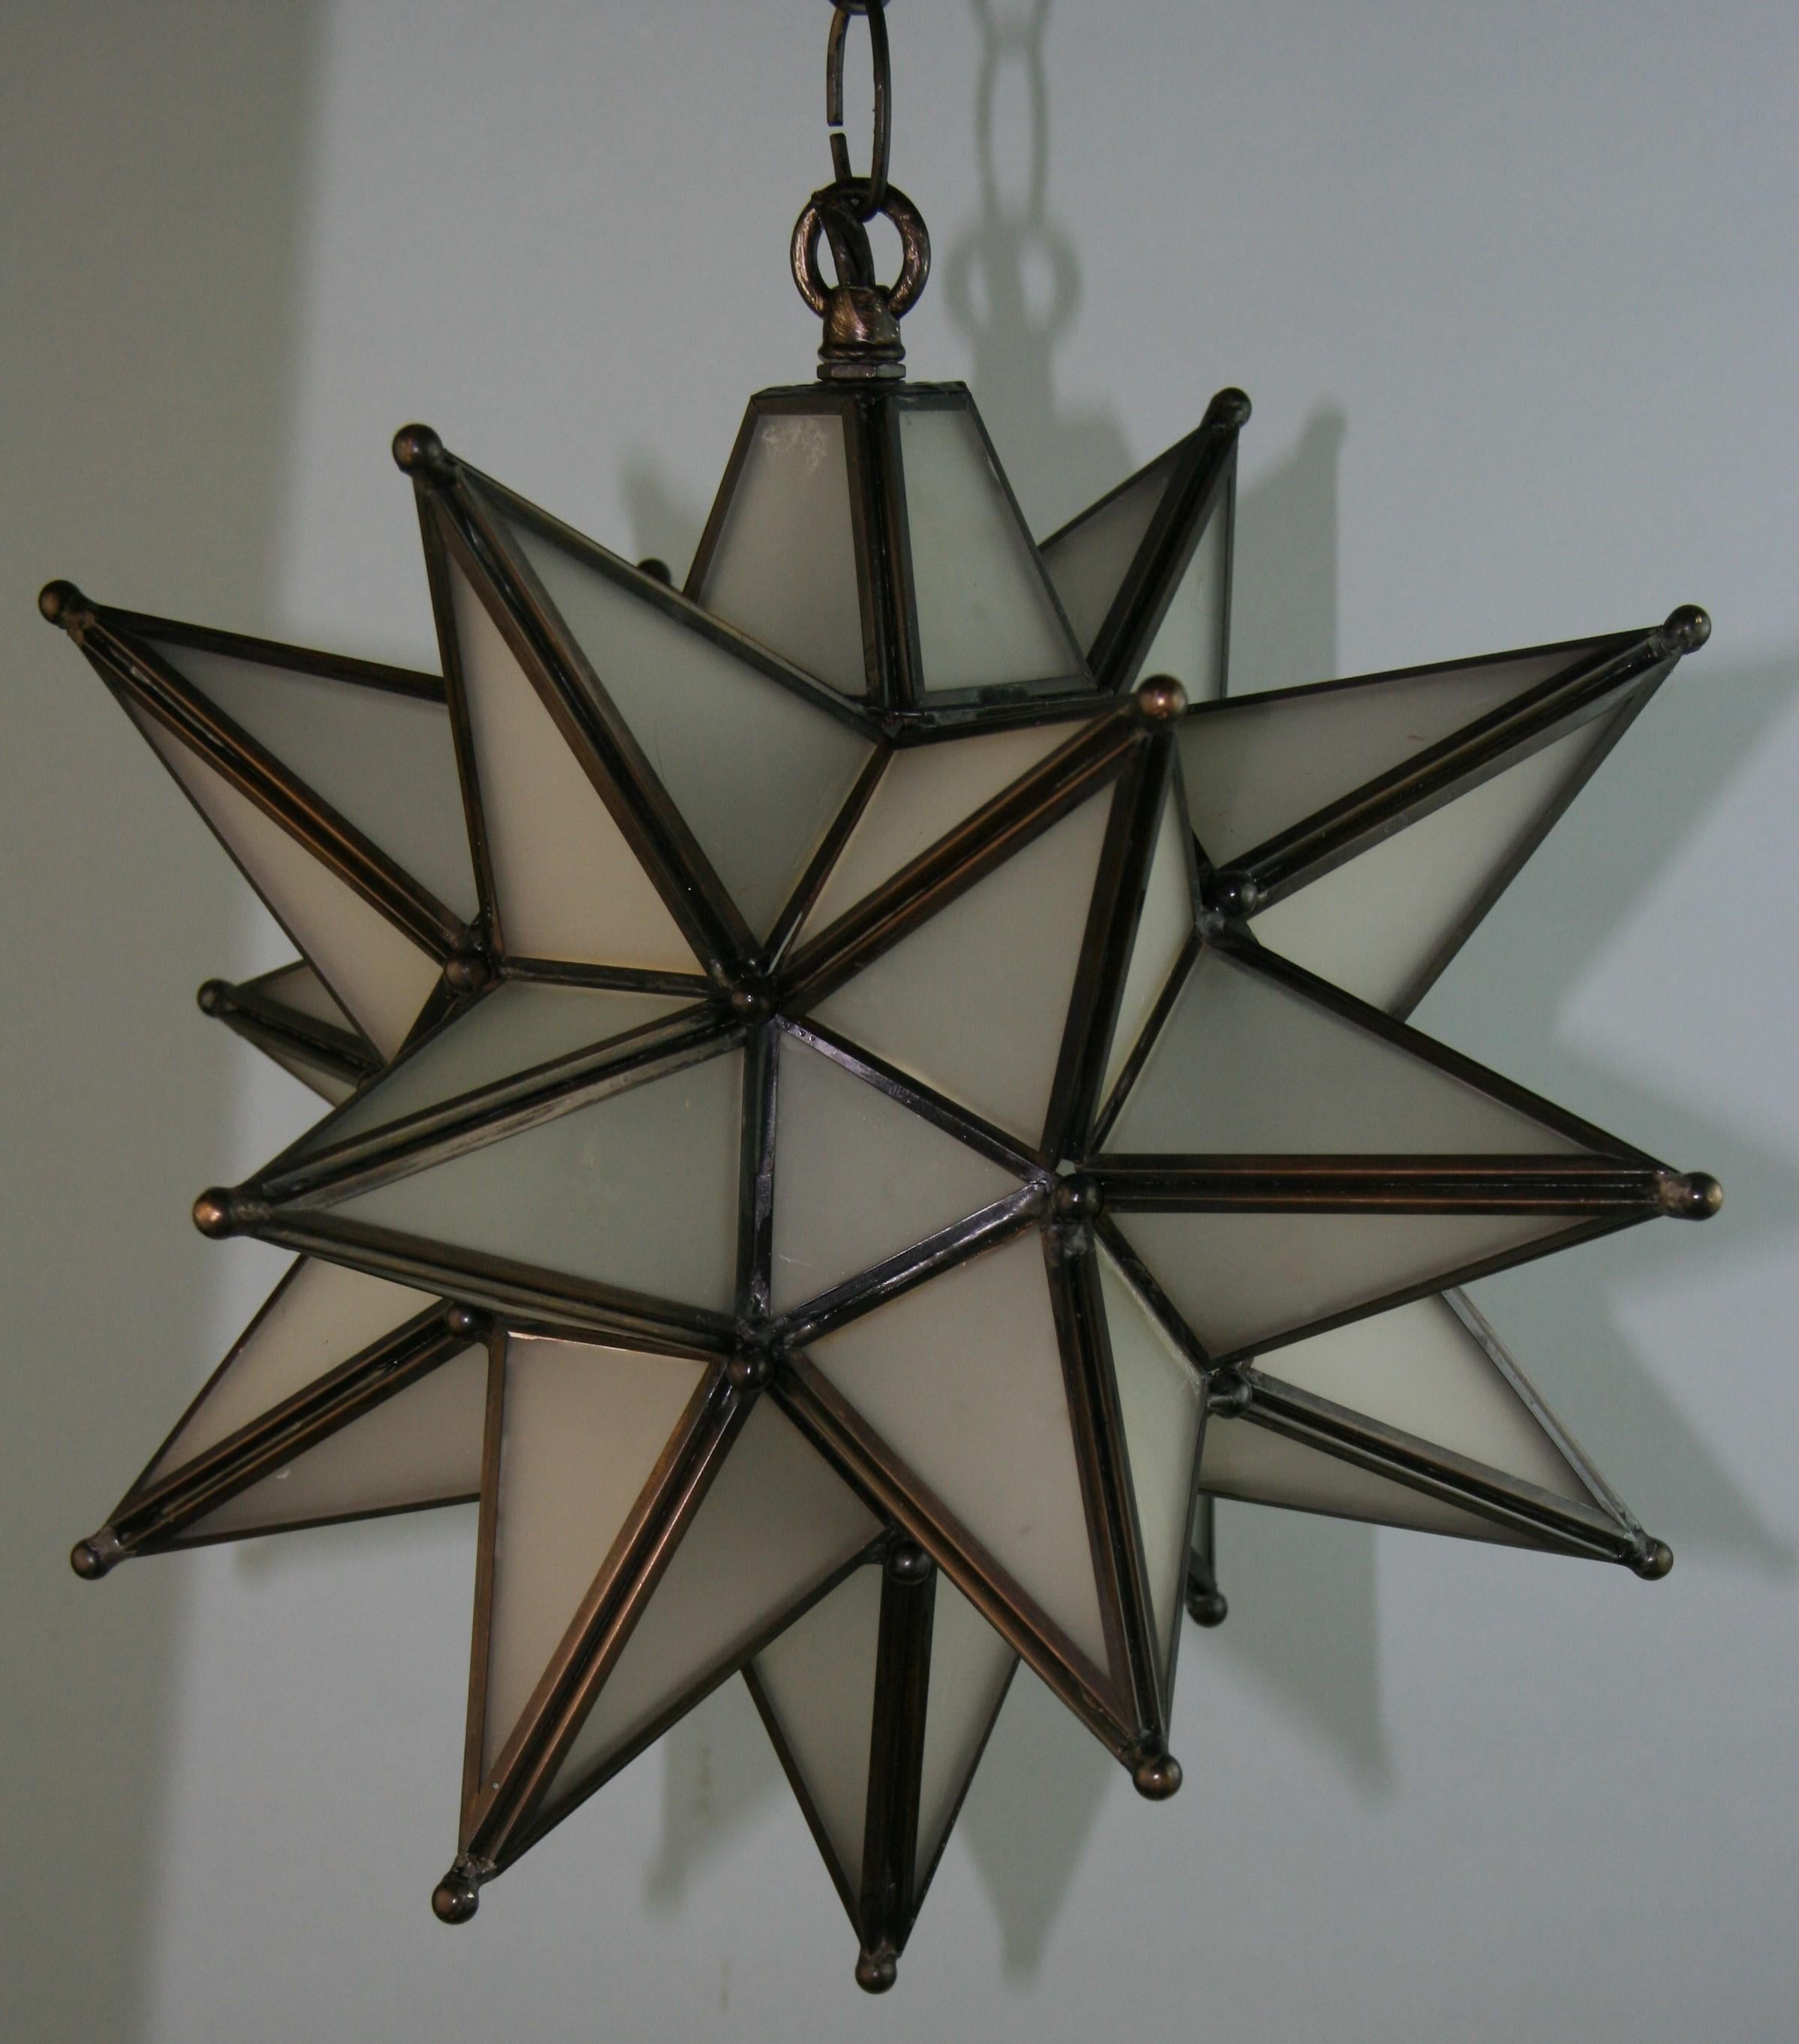 Monrovian star frosted glass pendant
Rewired takes one 60 watt  bulb
Supplied with 3 feed chain and canopy.
2 available priced individually